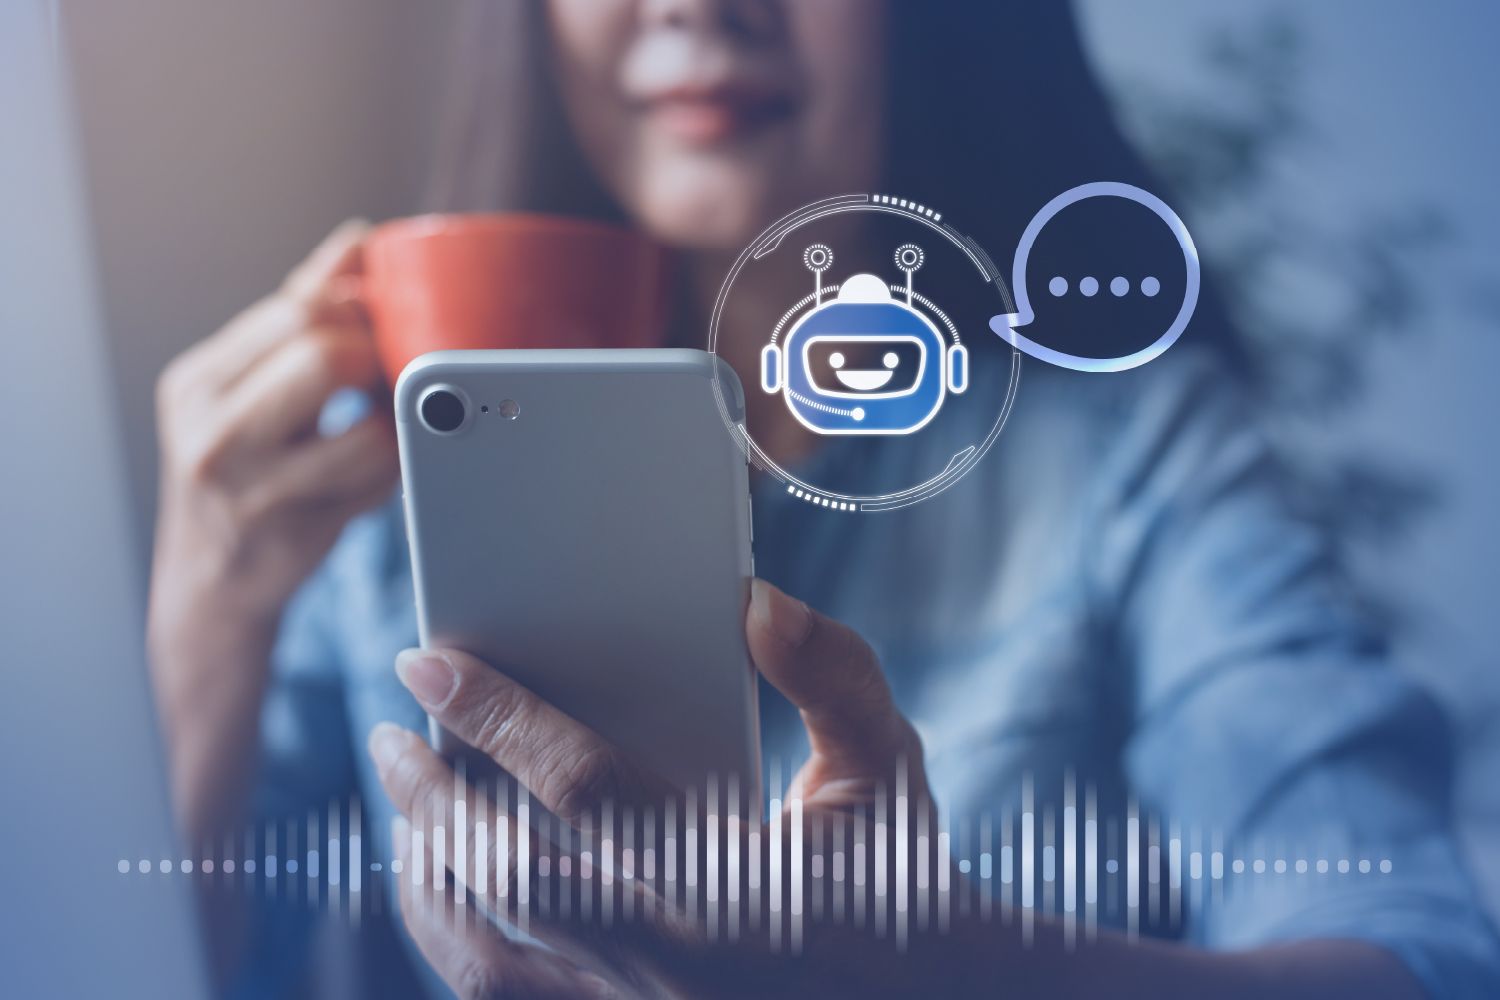 Customer Services Experience with Sarufi AI conversational